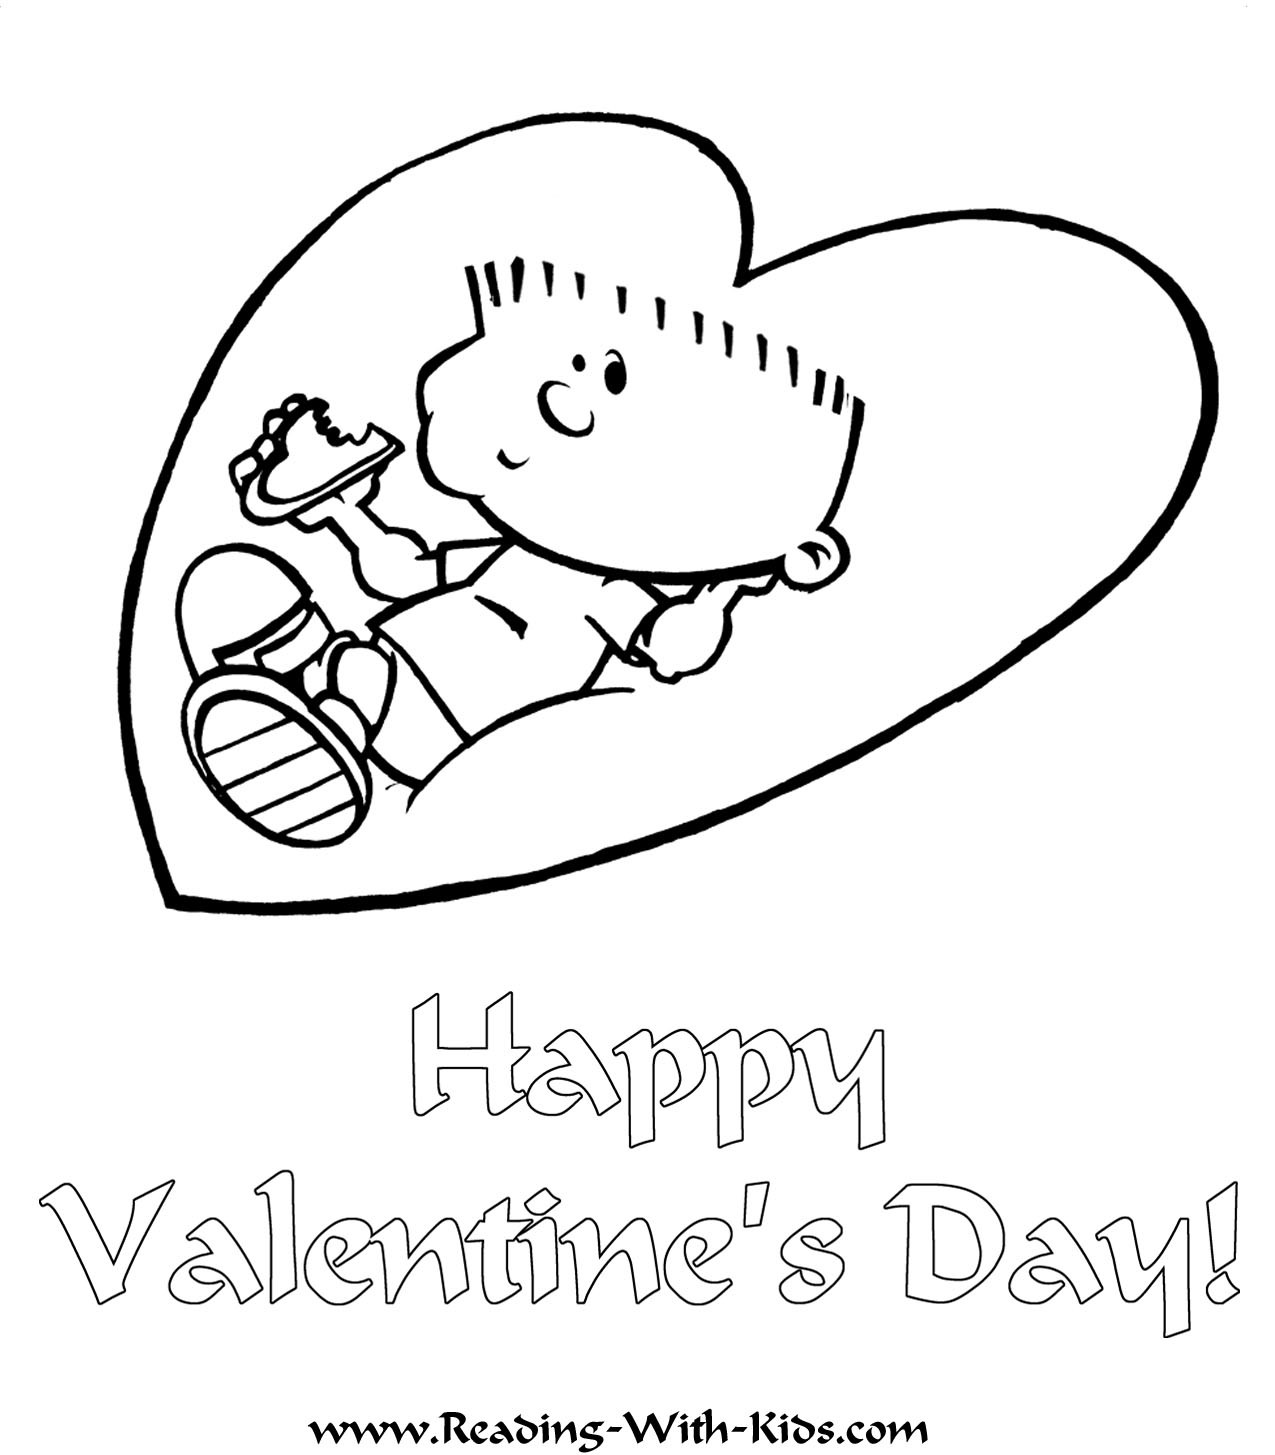 Boy Valentine Coloring Pages
 All Holiday Coloring Pages